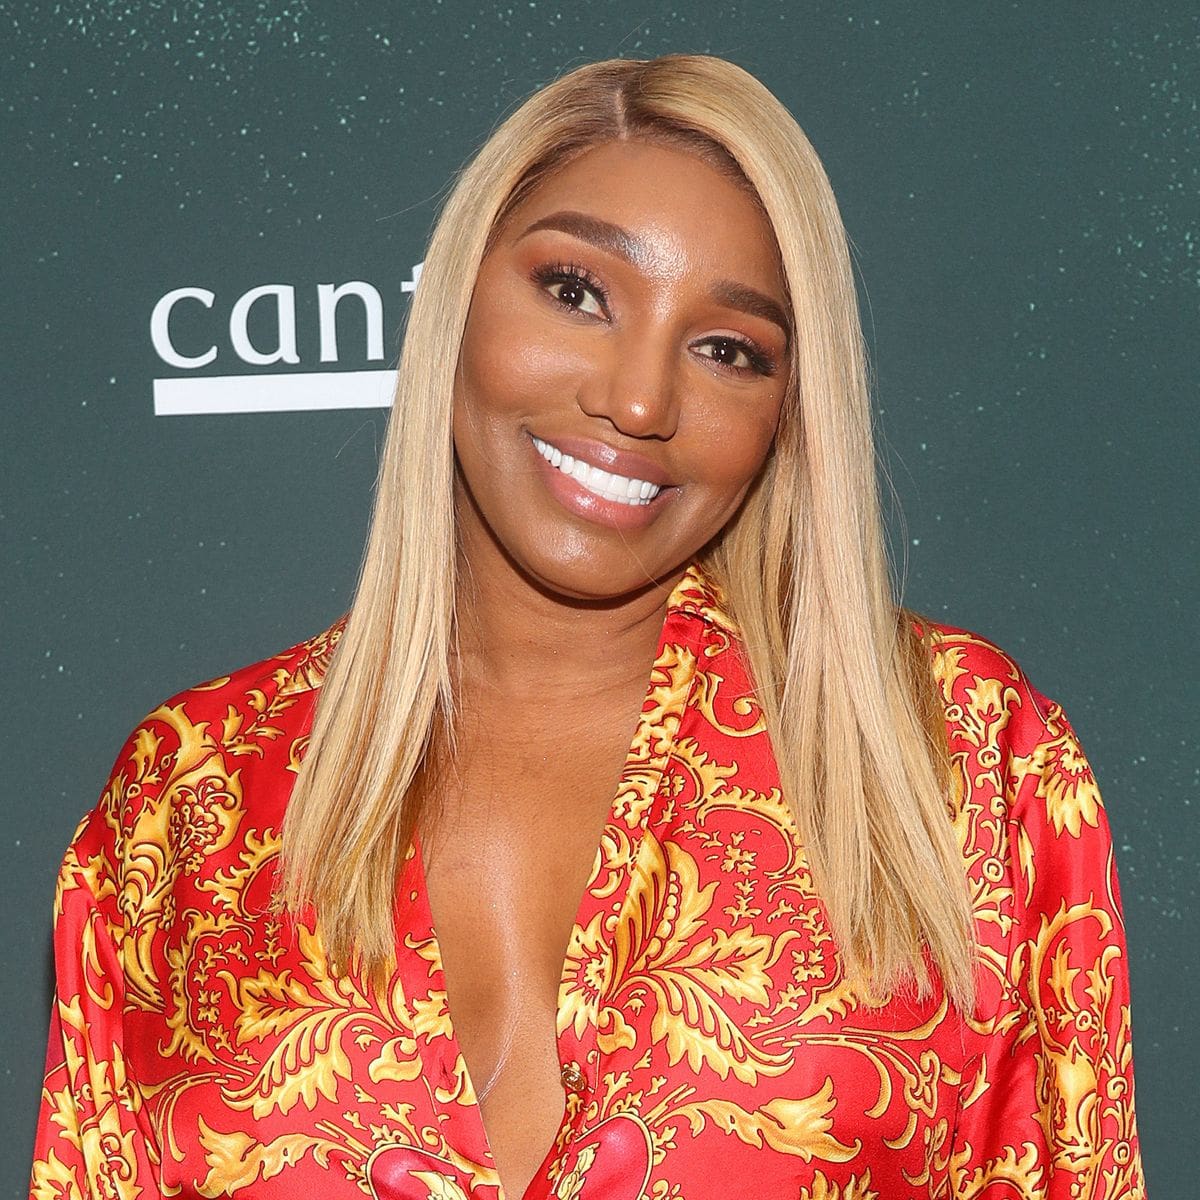 ”nene-leakes-is-grateful-for-the-good-people-in-her-life”